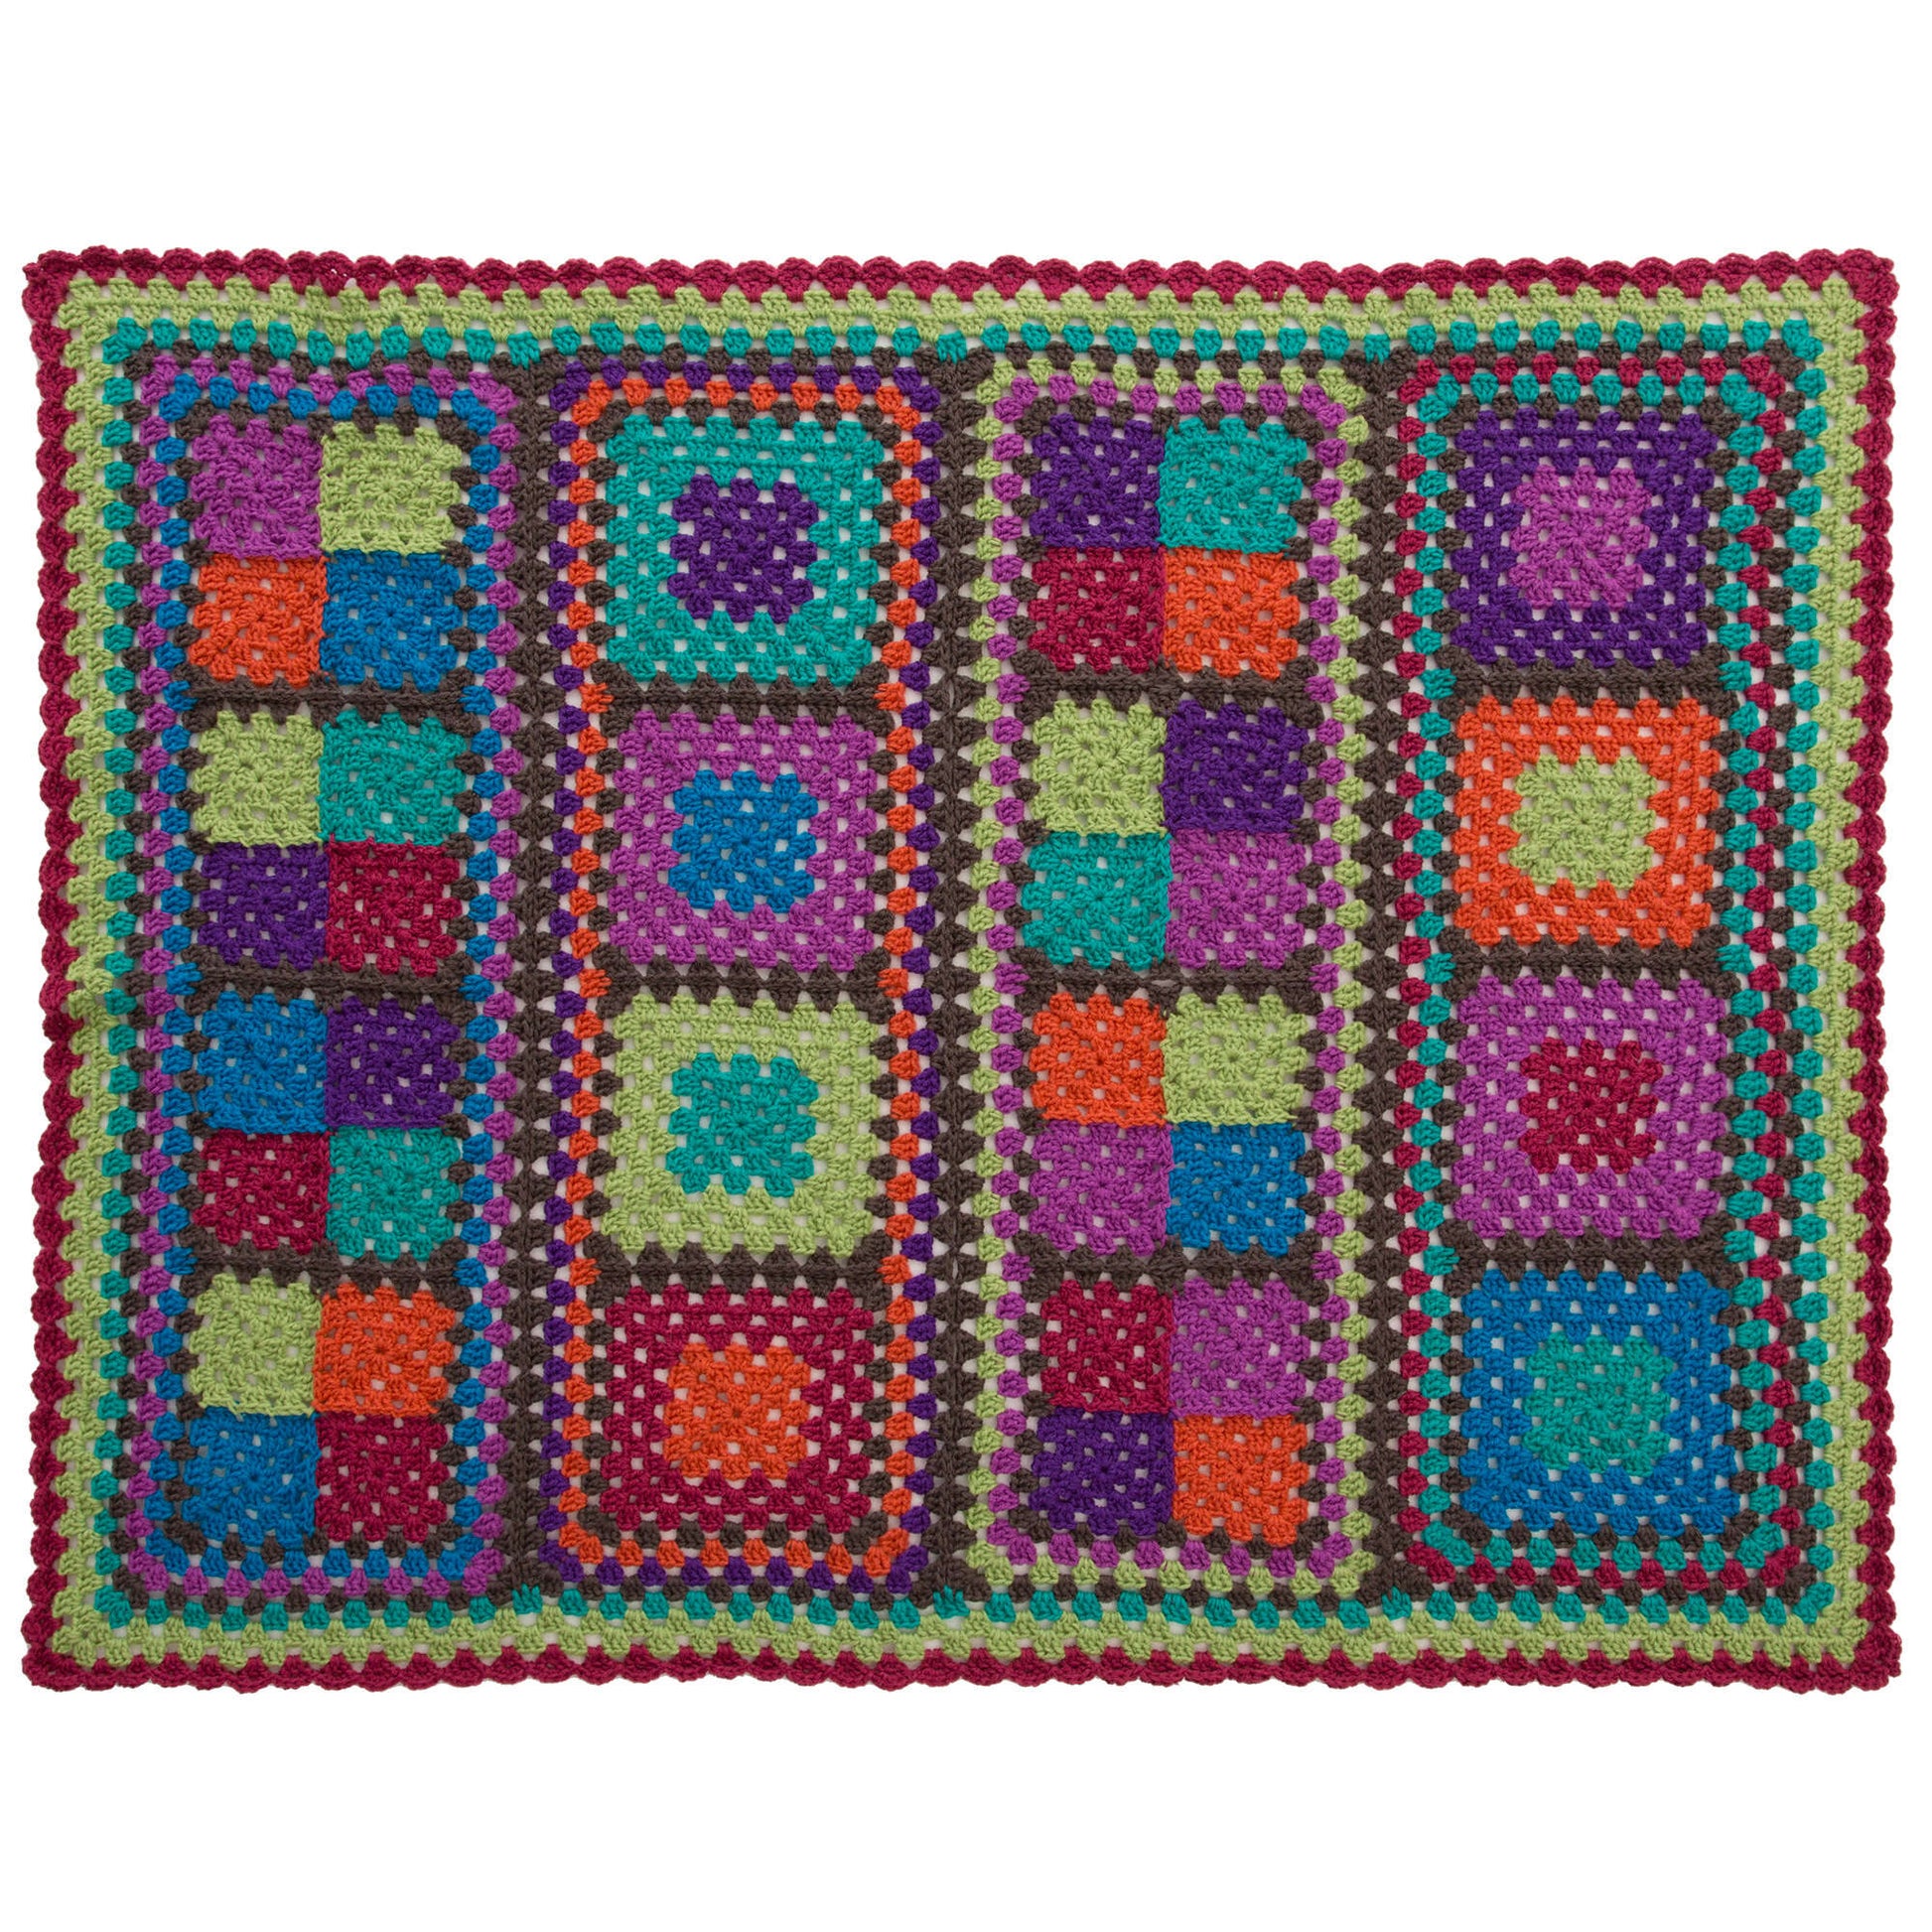 Free Red Heart Granny Re-mix Throw Crochet Pattern